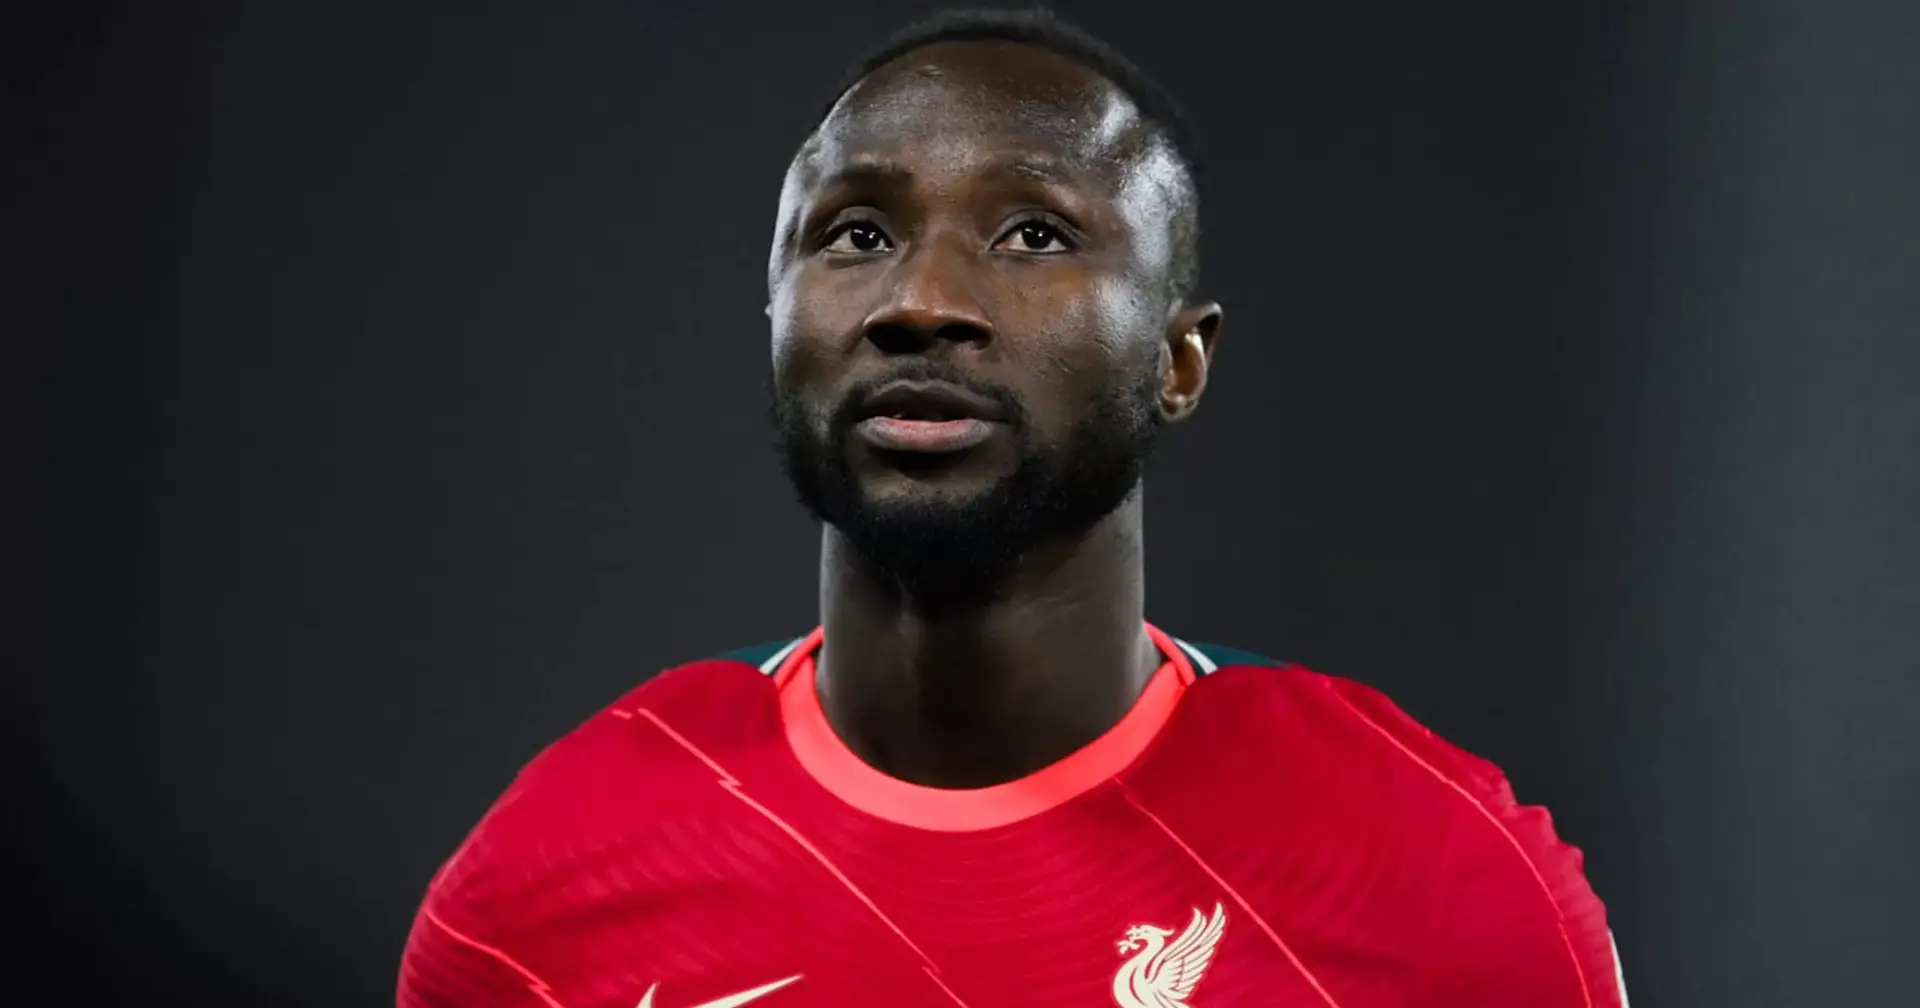 Keita unlikely to be fit for final Liverpool game as he misses training